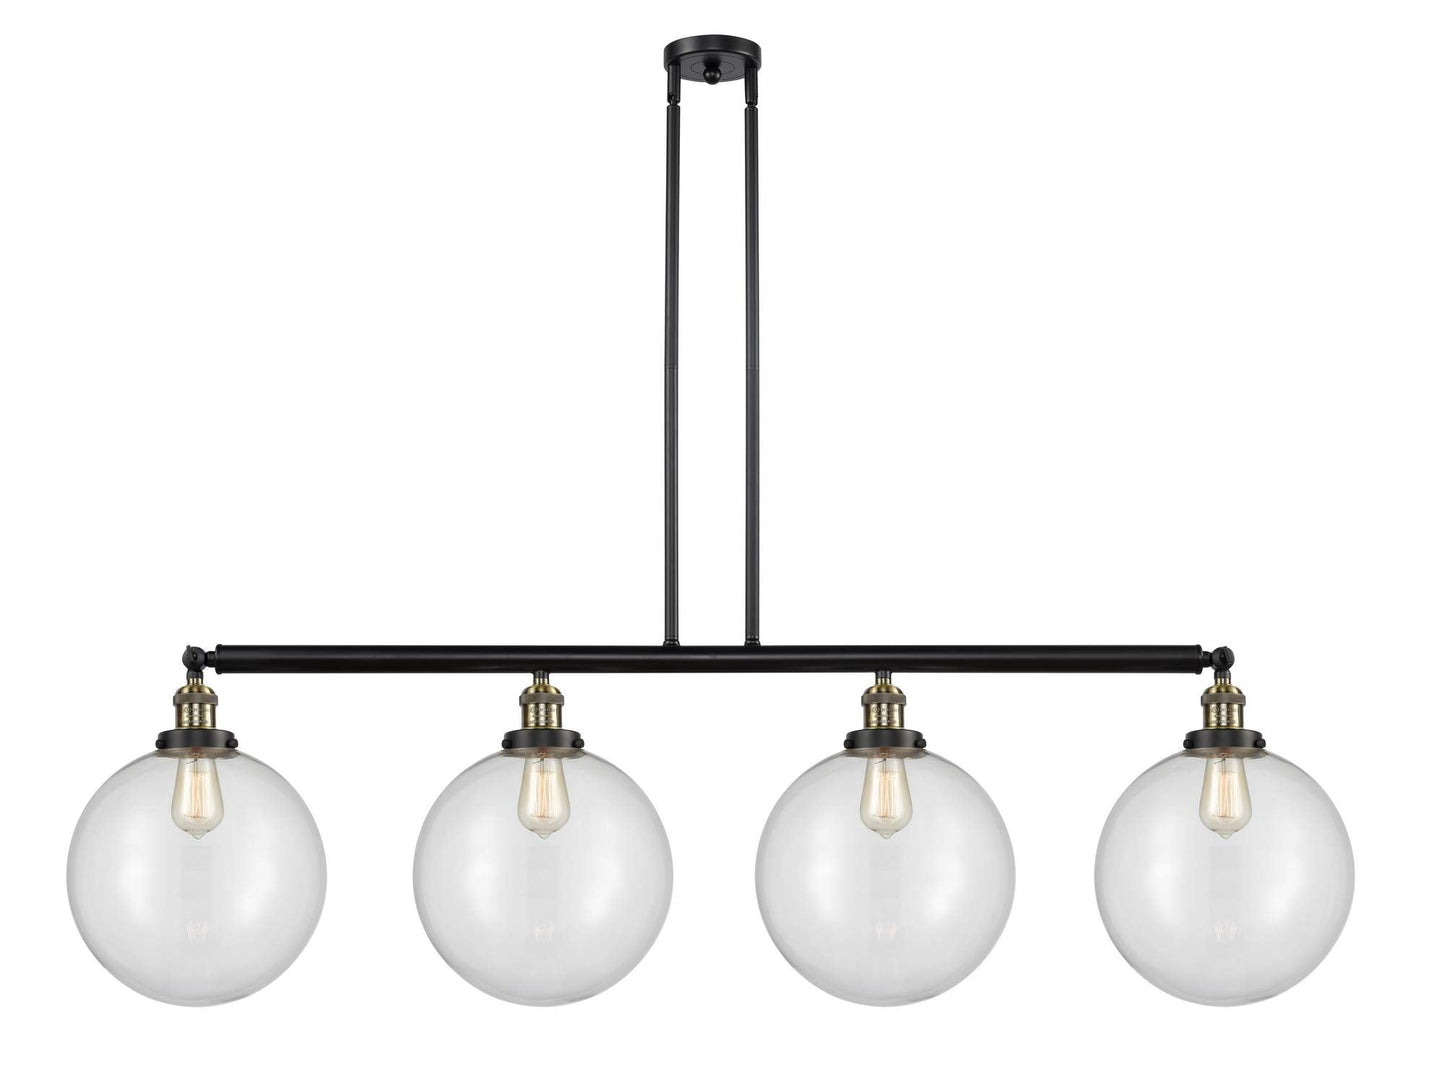 214-BAB-G202-12 4-Light 56" Black Antique Brass Island Light - Clear Beacon Glass - LED Bulb - Dimmensions: 56 x 12 x 16<br>Minimum Height : 26<br>Maximum Height : 50 - Sloped Ceiling Compatible: Yes